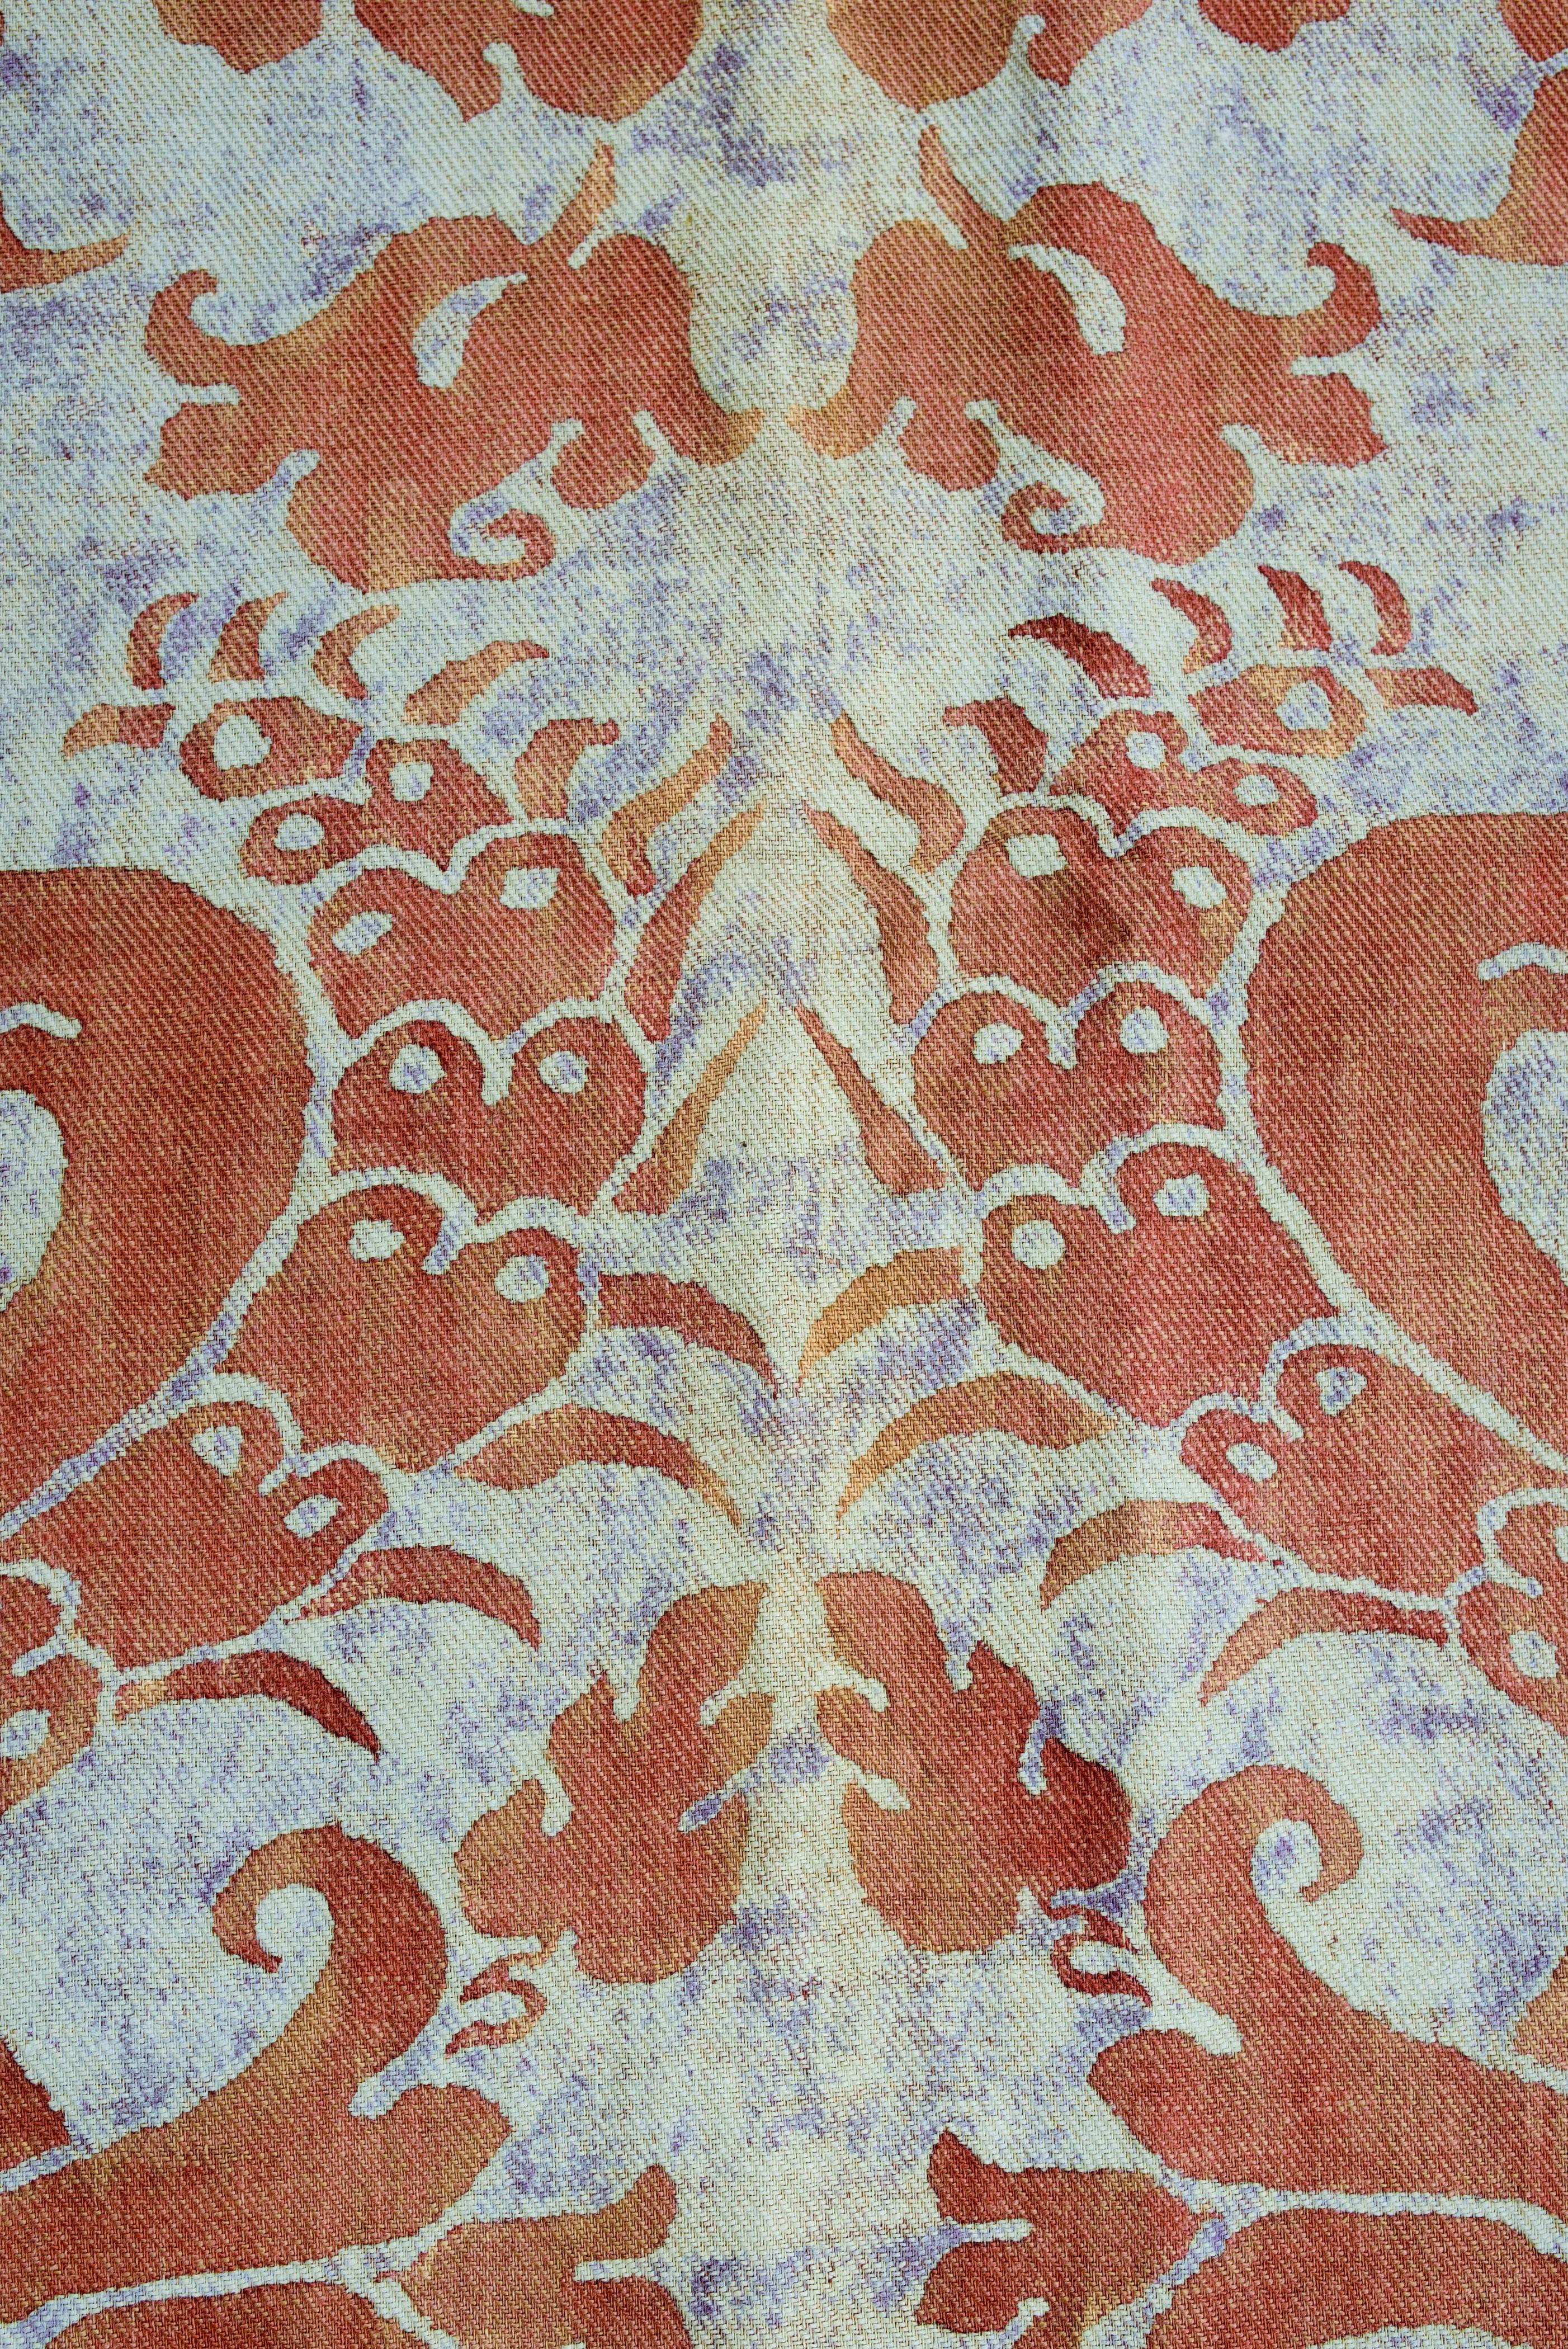 A Mariano Fortuny Printed Cotton Fabric - Italy Circa 1940 For Sale 5